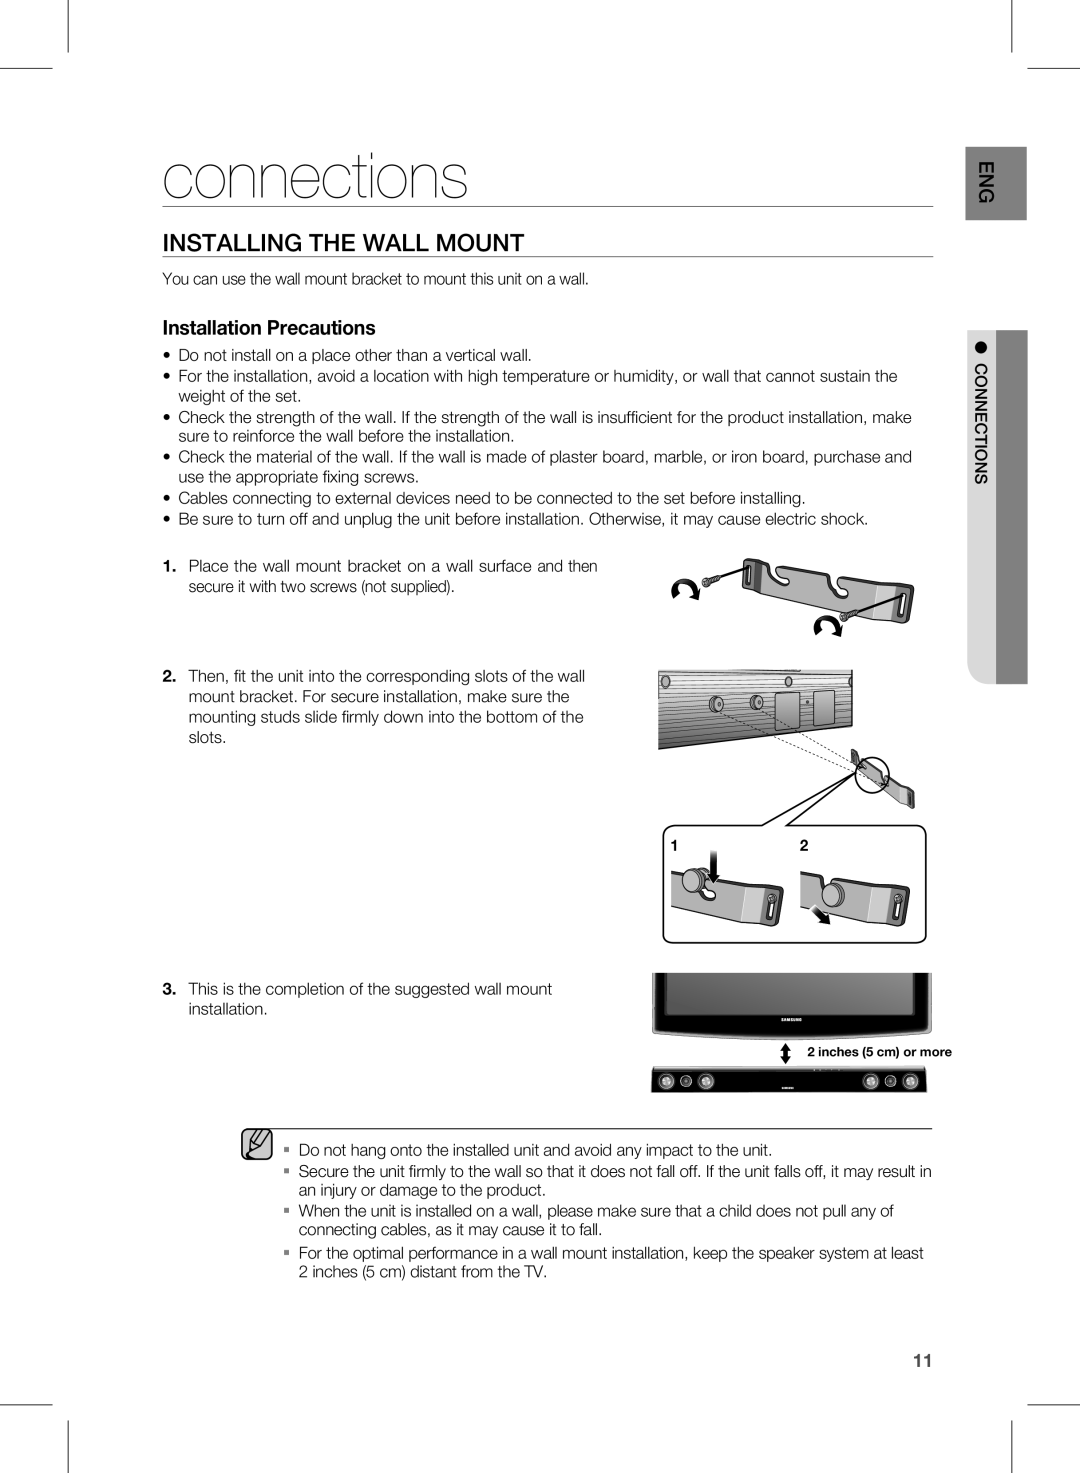 Samsung HW-D451, HW-D450 user manual connections, INSTAllING THE WAll MOUNT, Installation Precautions 